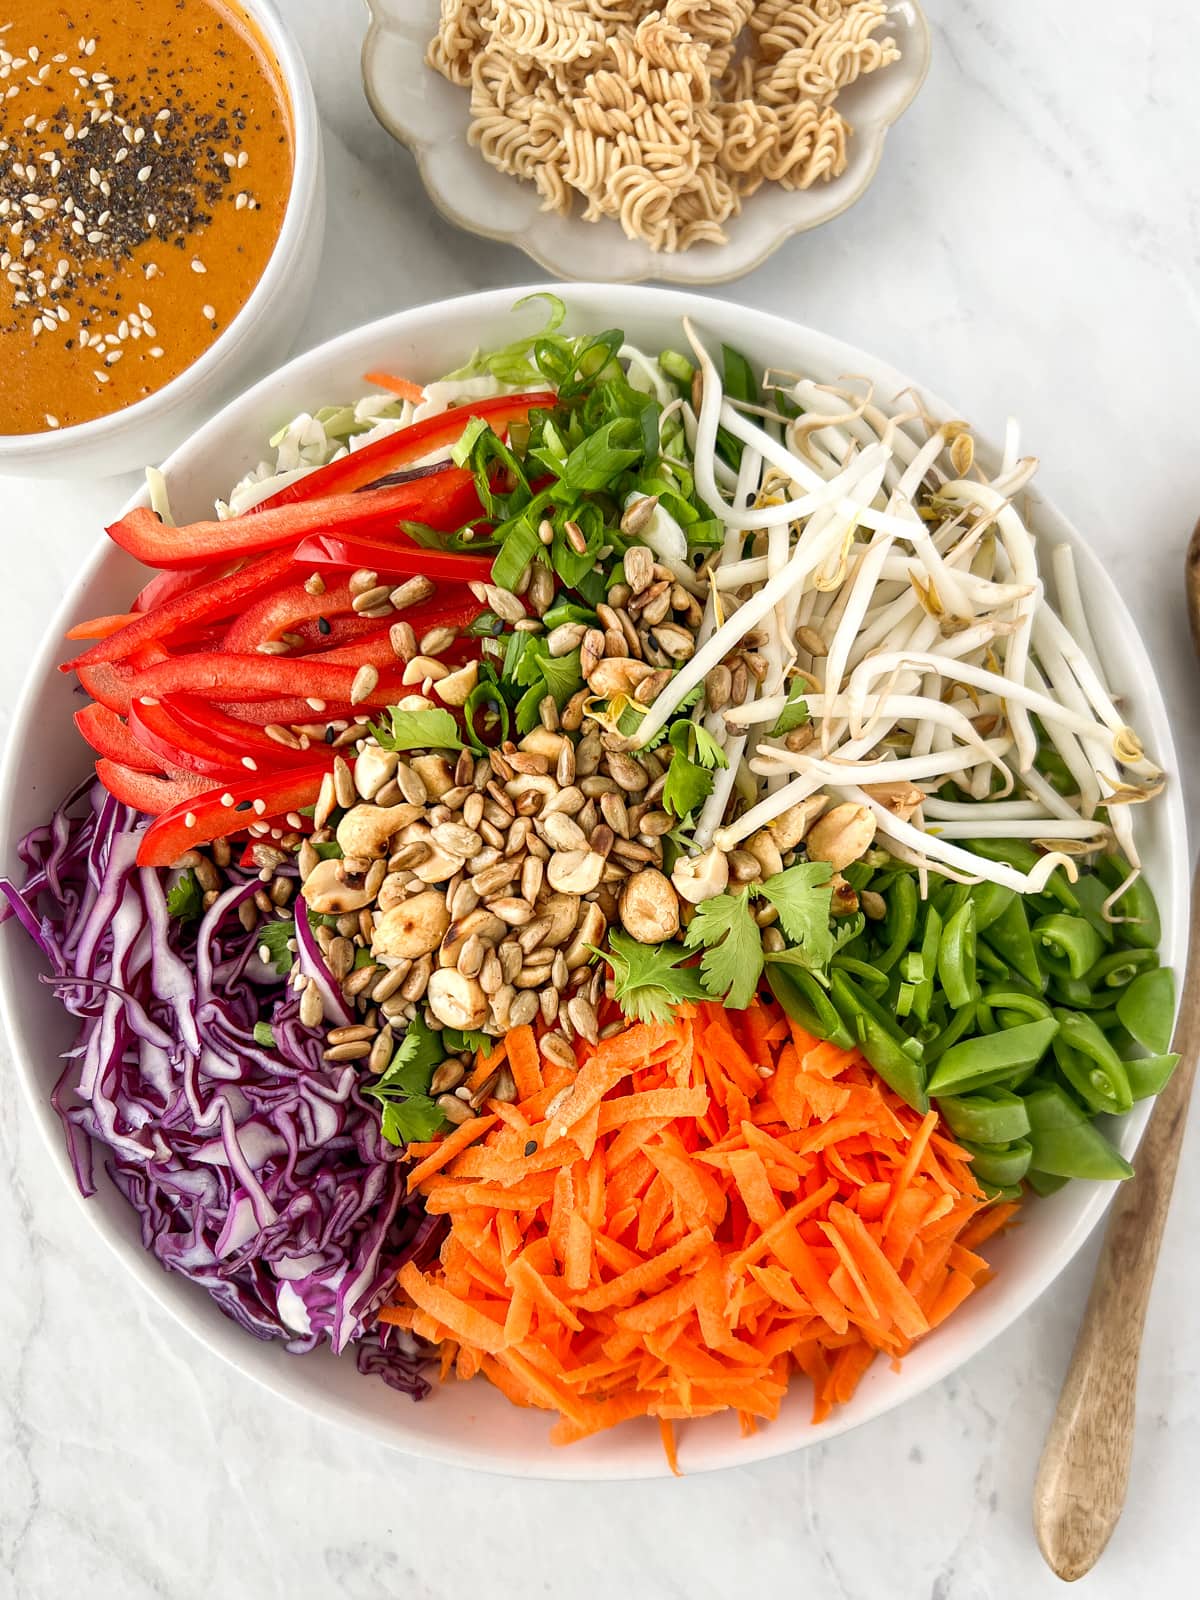 Ingredients to make an Asian chopped salad in a large serving bowl surrounding by smaller bowls of toasted ramen noodles and Asian carrot ginger dressing.